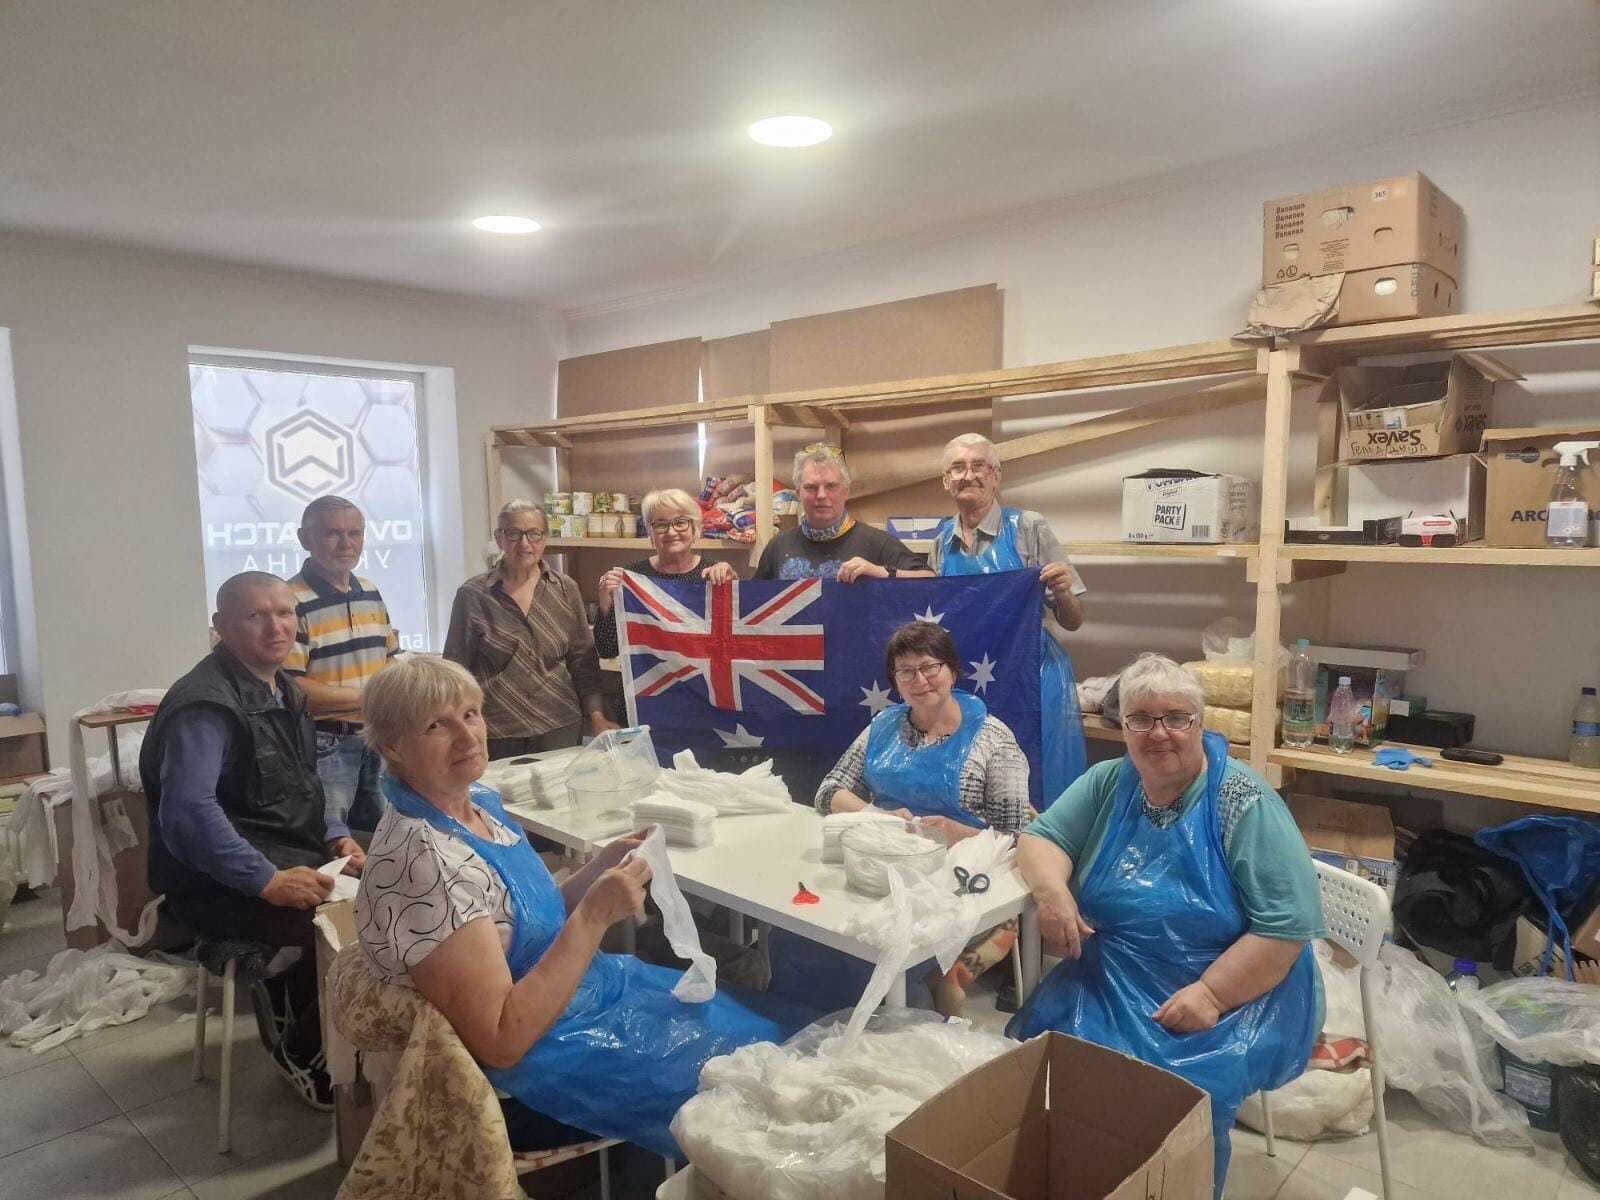 Some of the Ukrainian volunteers who asked Daniel Hall to show their photos to people back home. The group raised the Australian flag in solidarity with their guest from Inverness who was born and brought up Down Under.